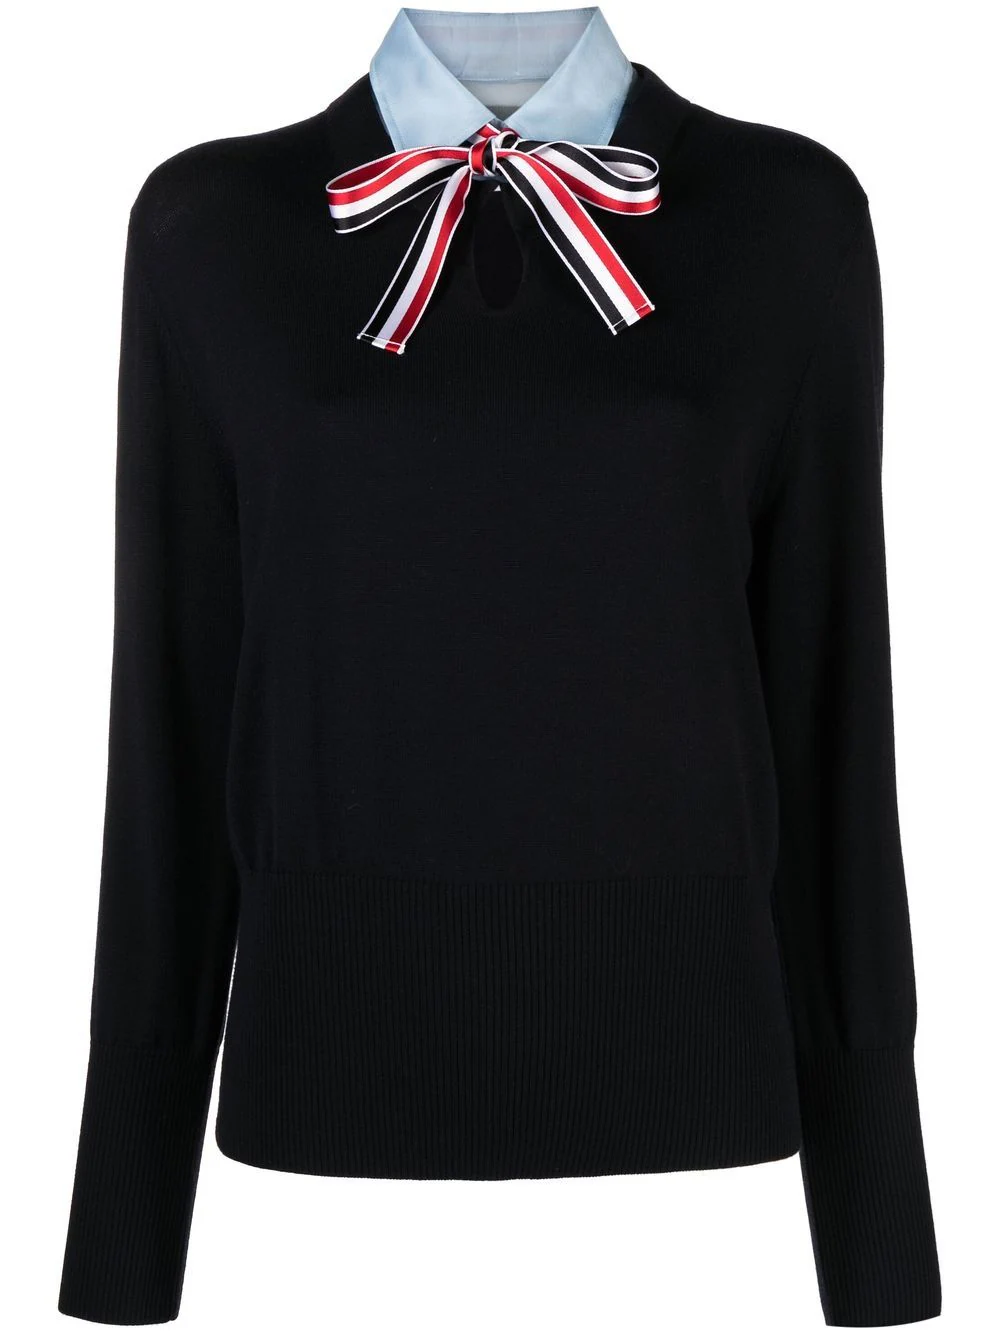 Thom Browne Sweater With Collar Detail In Black